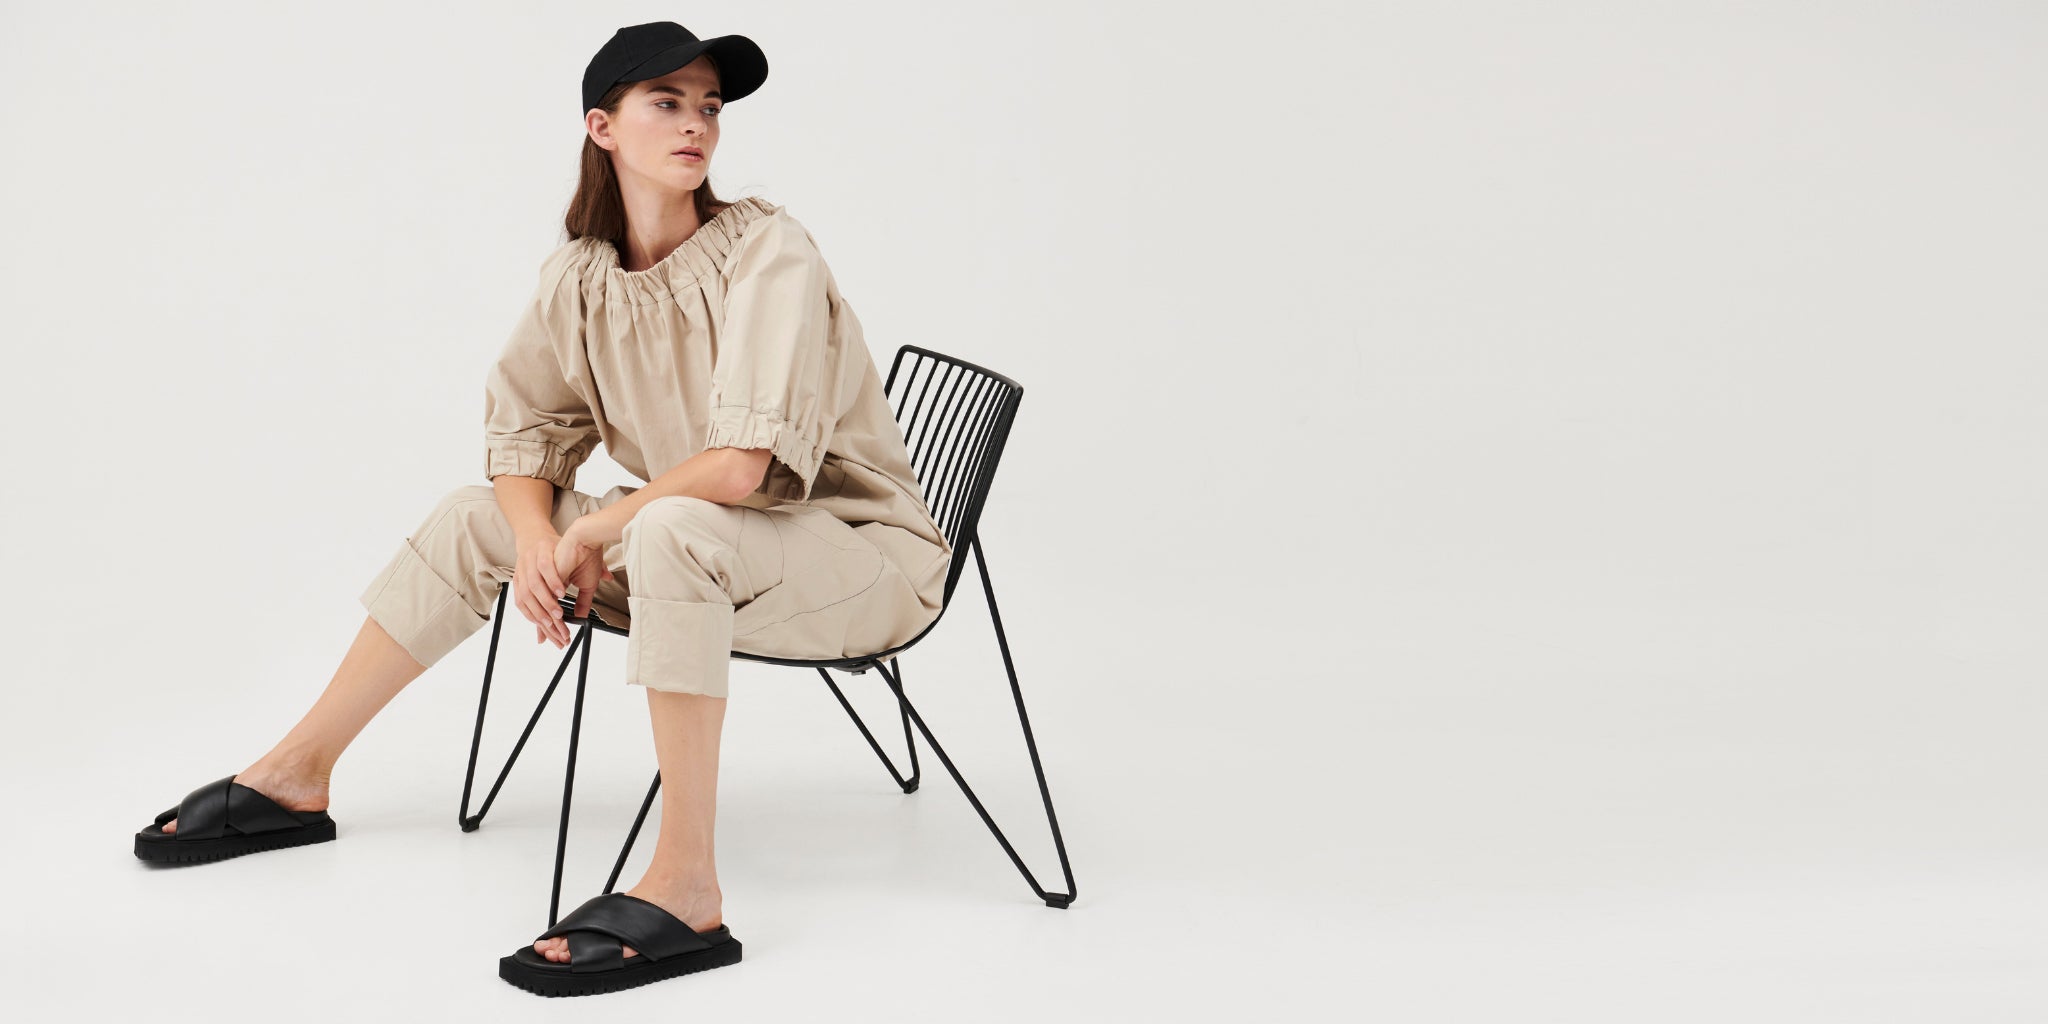 Cuspi Panorama Elasticated Dress and Cuffed Pant. Shop local and explore the latest collection of trans-seasonal styles designed and made in Melbourne, Australia. Cuspi: born with the desire to create considered high quality timeless pieces for everyday.